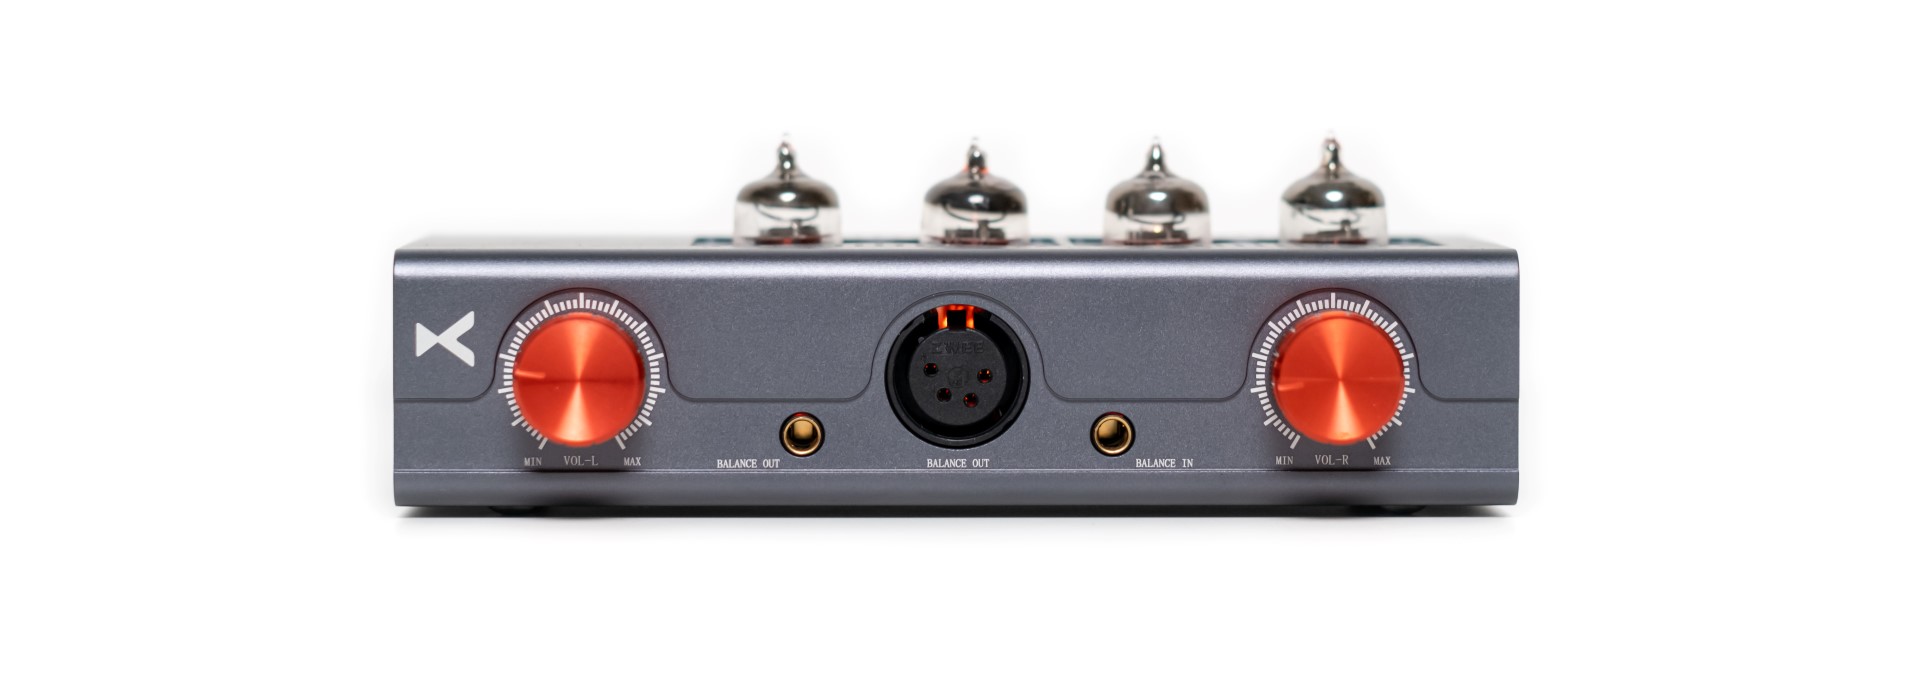 xDuoo MT604 Review – Tube Goodness For The Masses - Soundnews